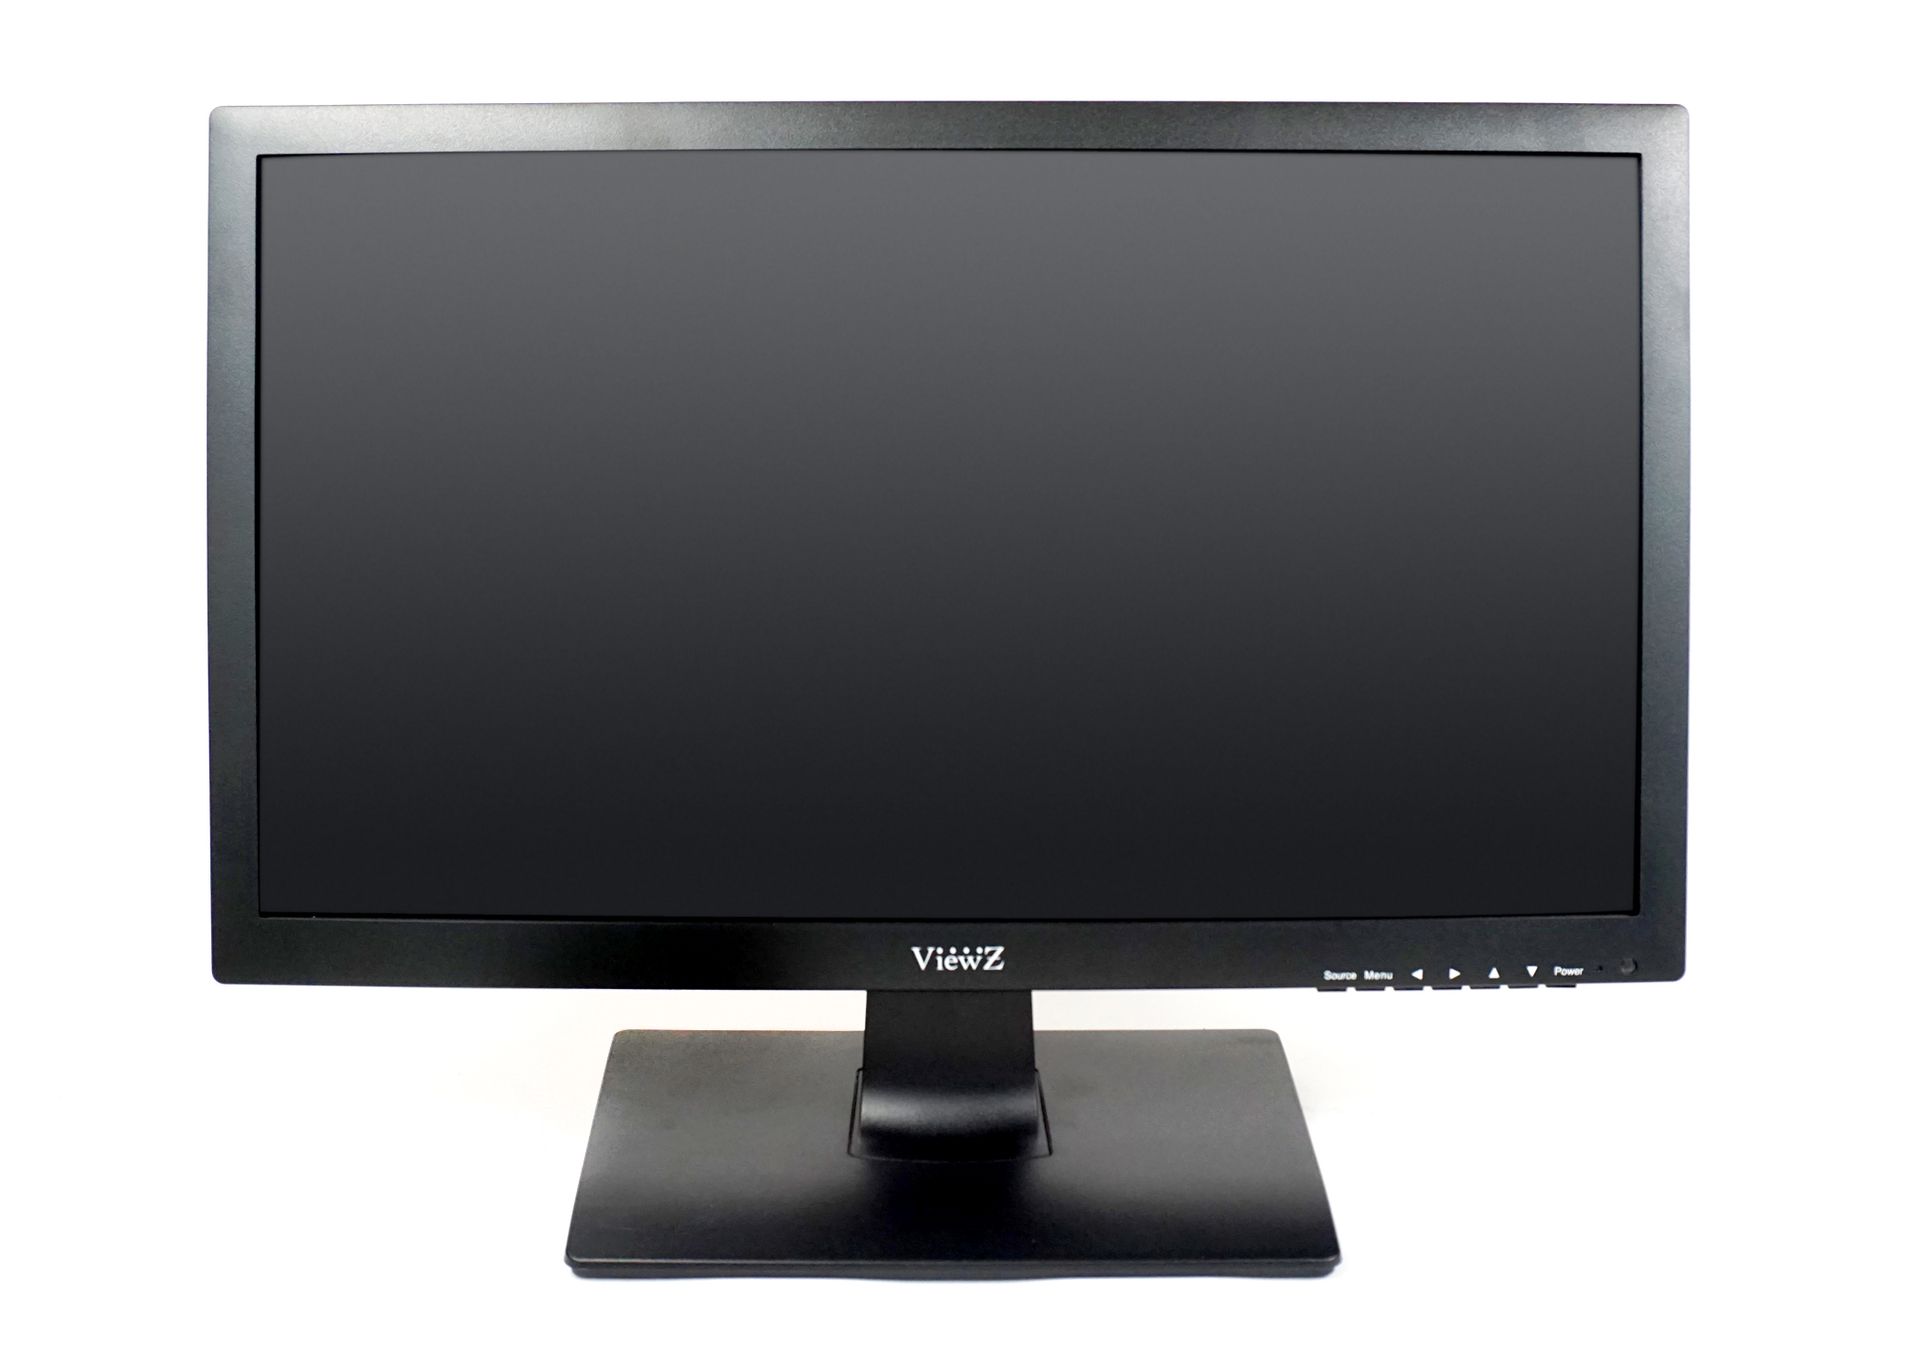 A benq computer monitor is on a white background